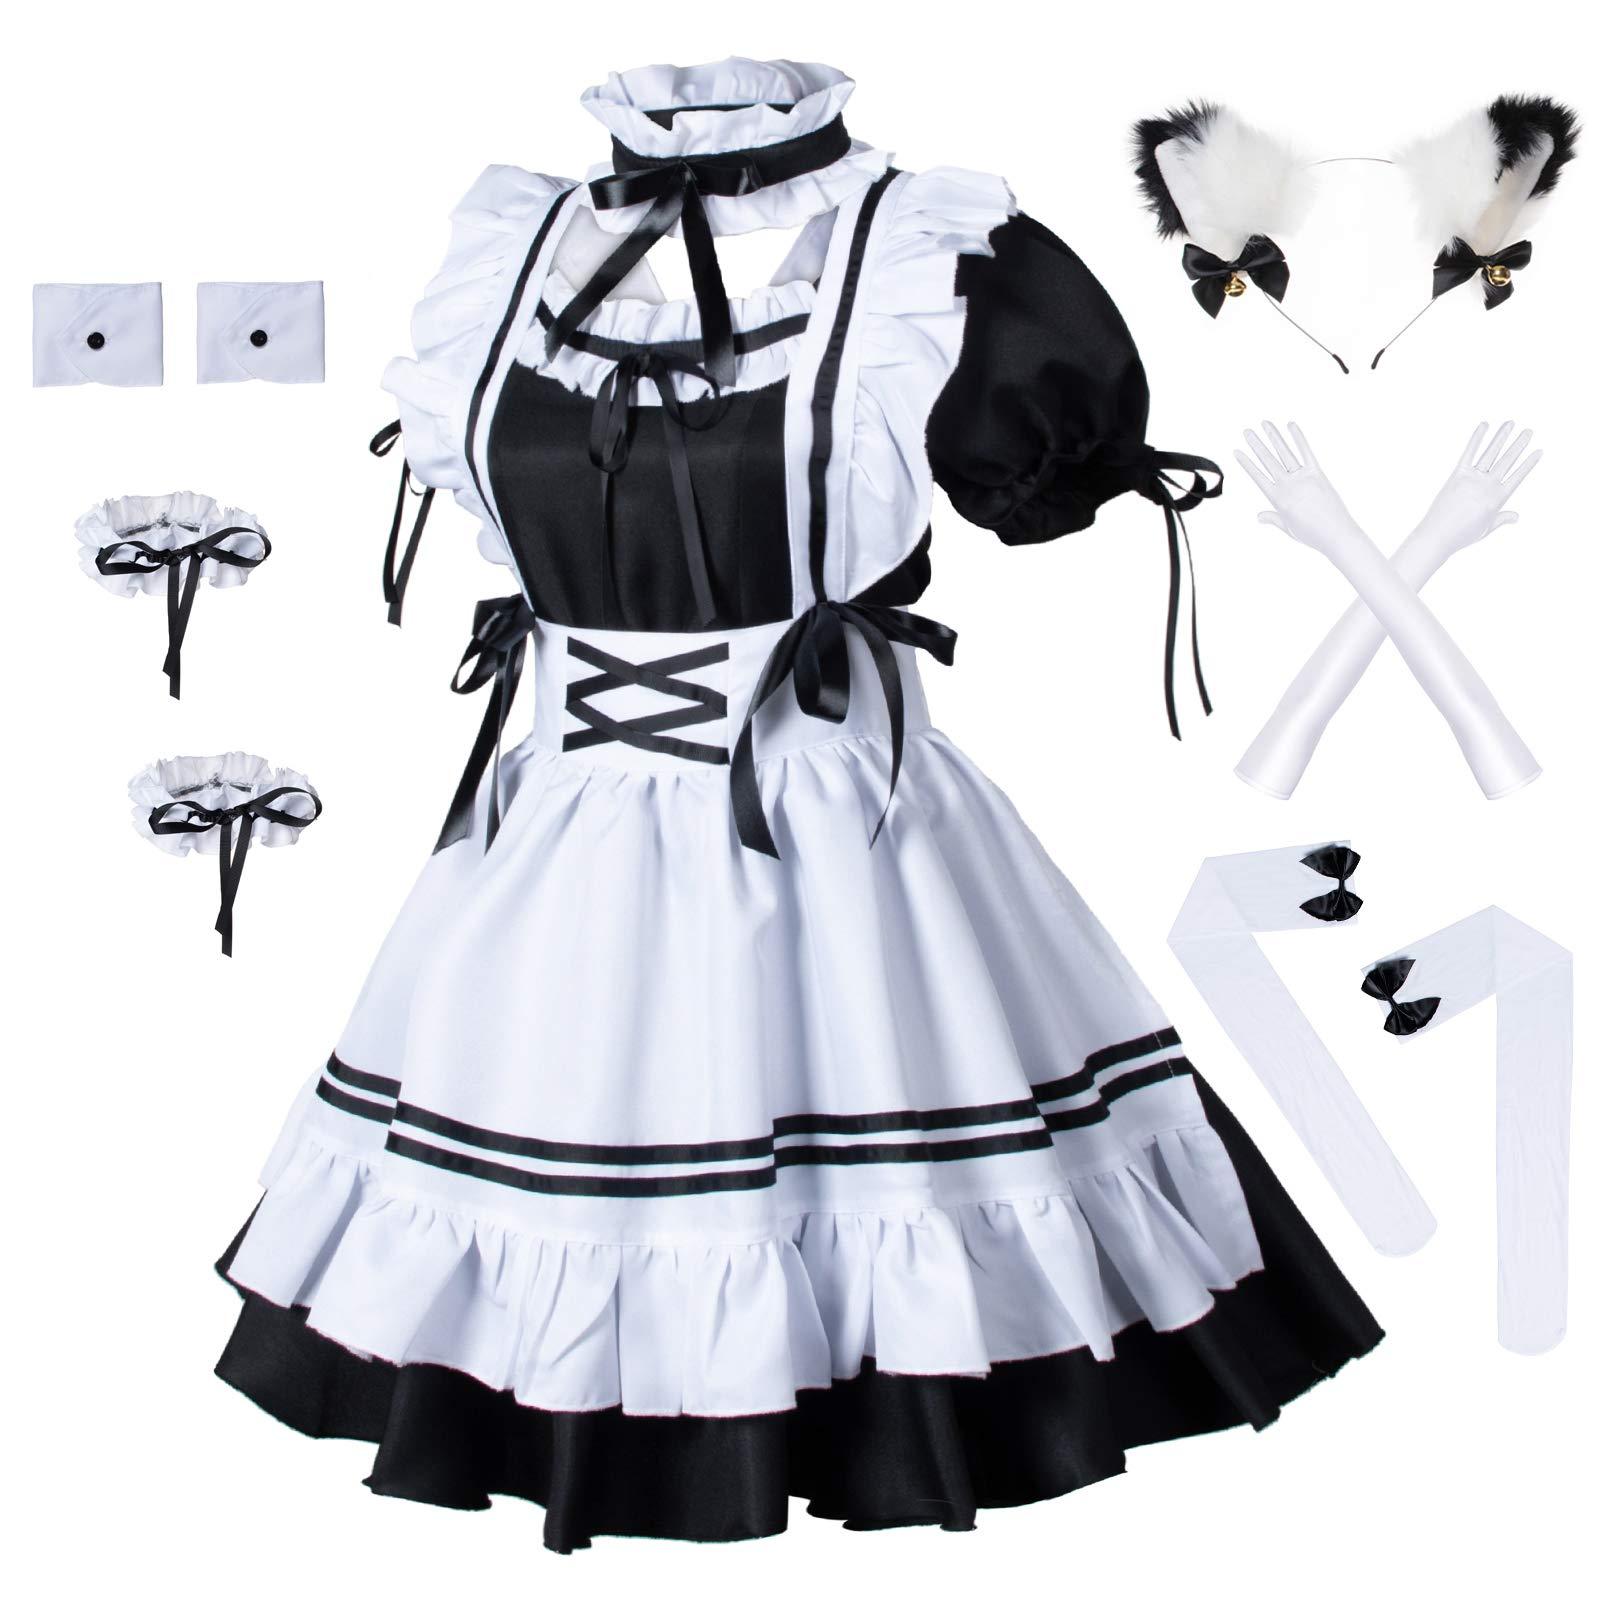 Anime French Maid Lolita Fancy Queen Princess Dress Cosplay Costume Furry Cat Ear Gloves Socks set（PinkL）